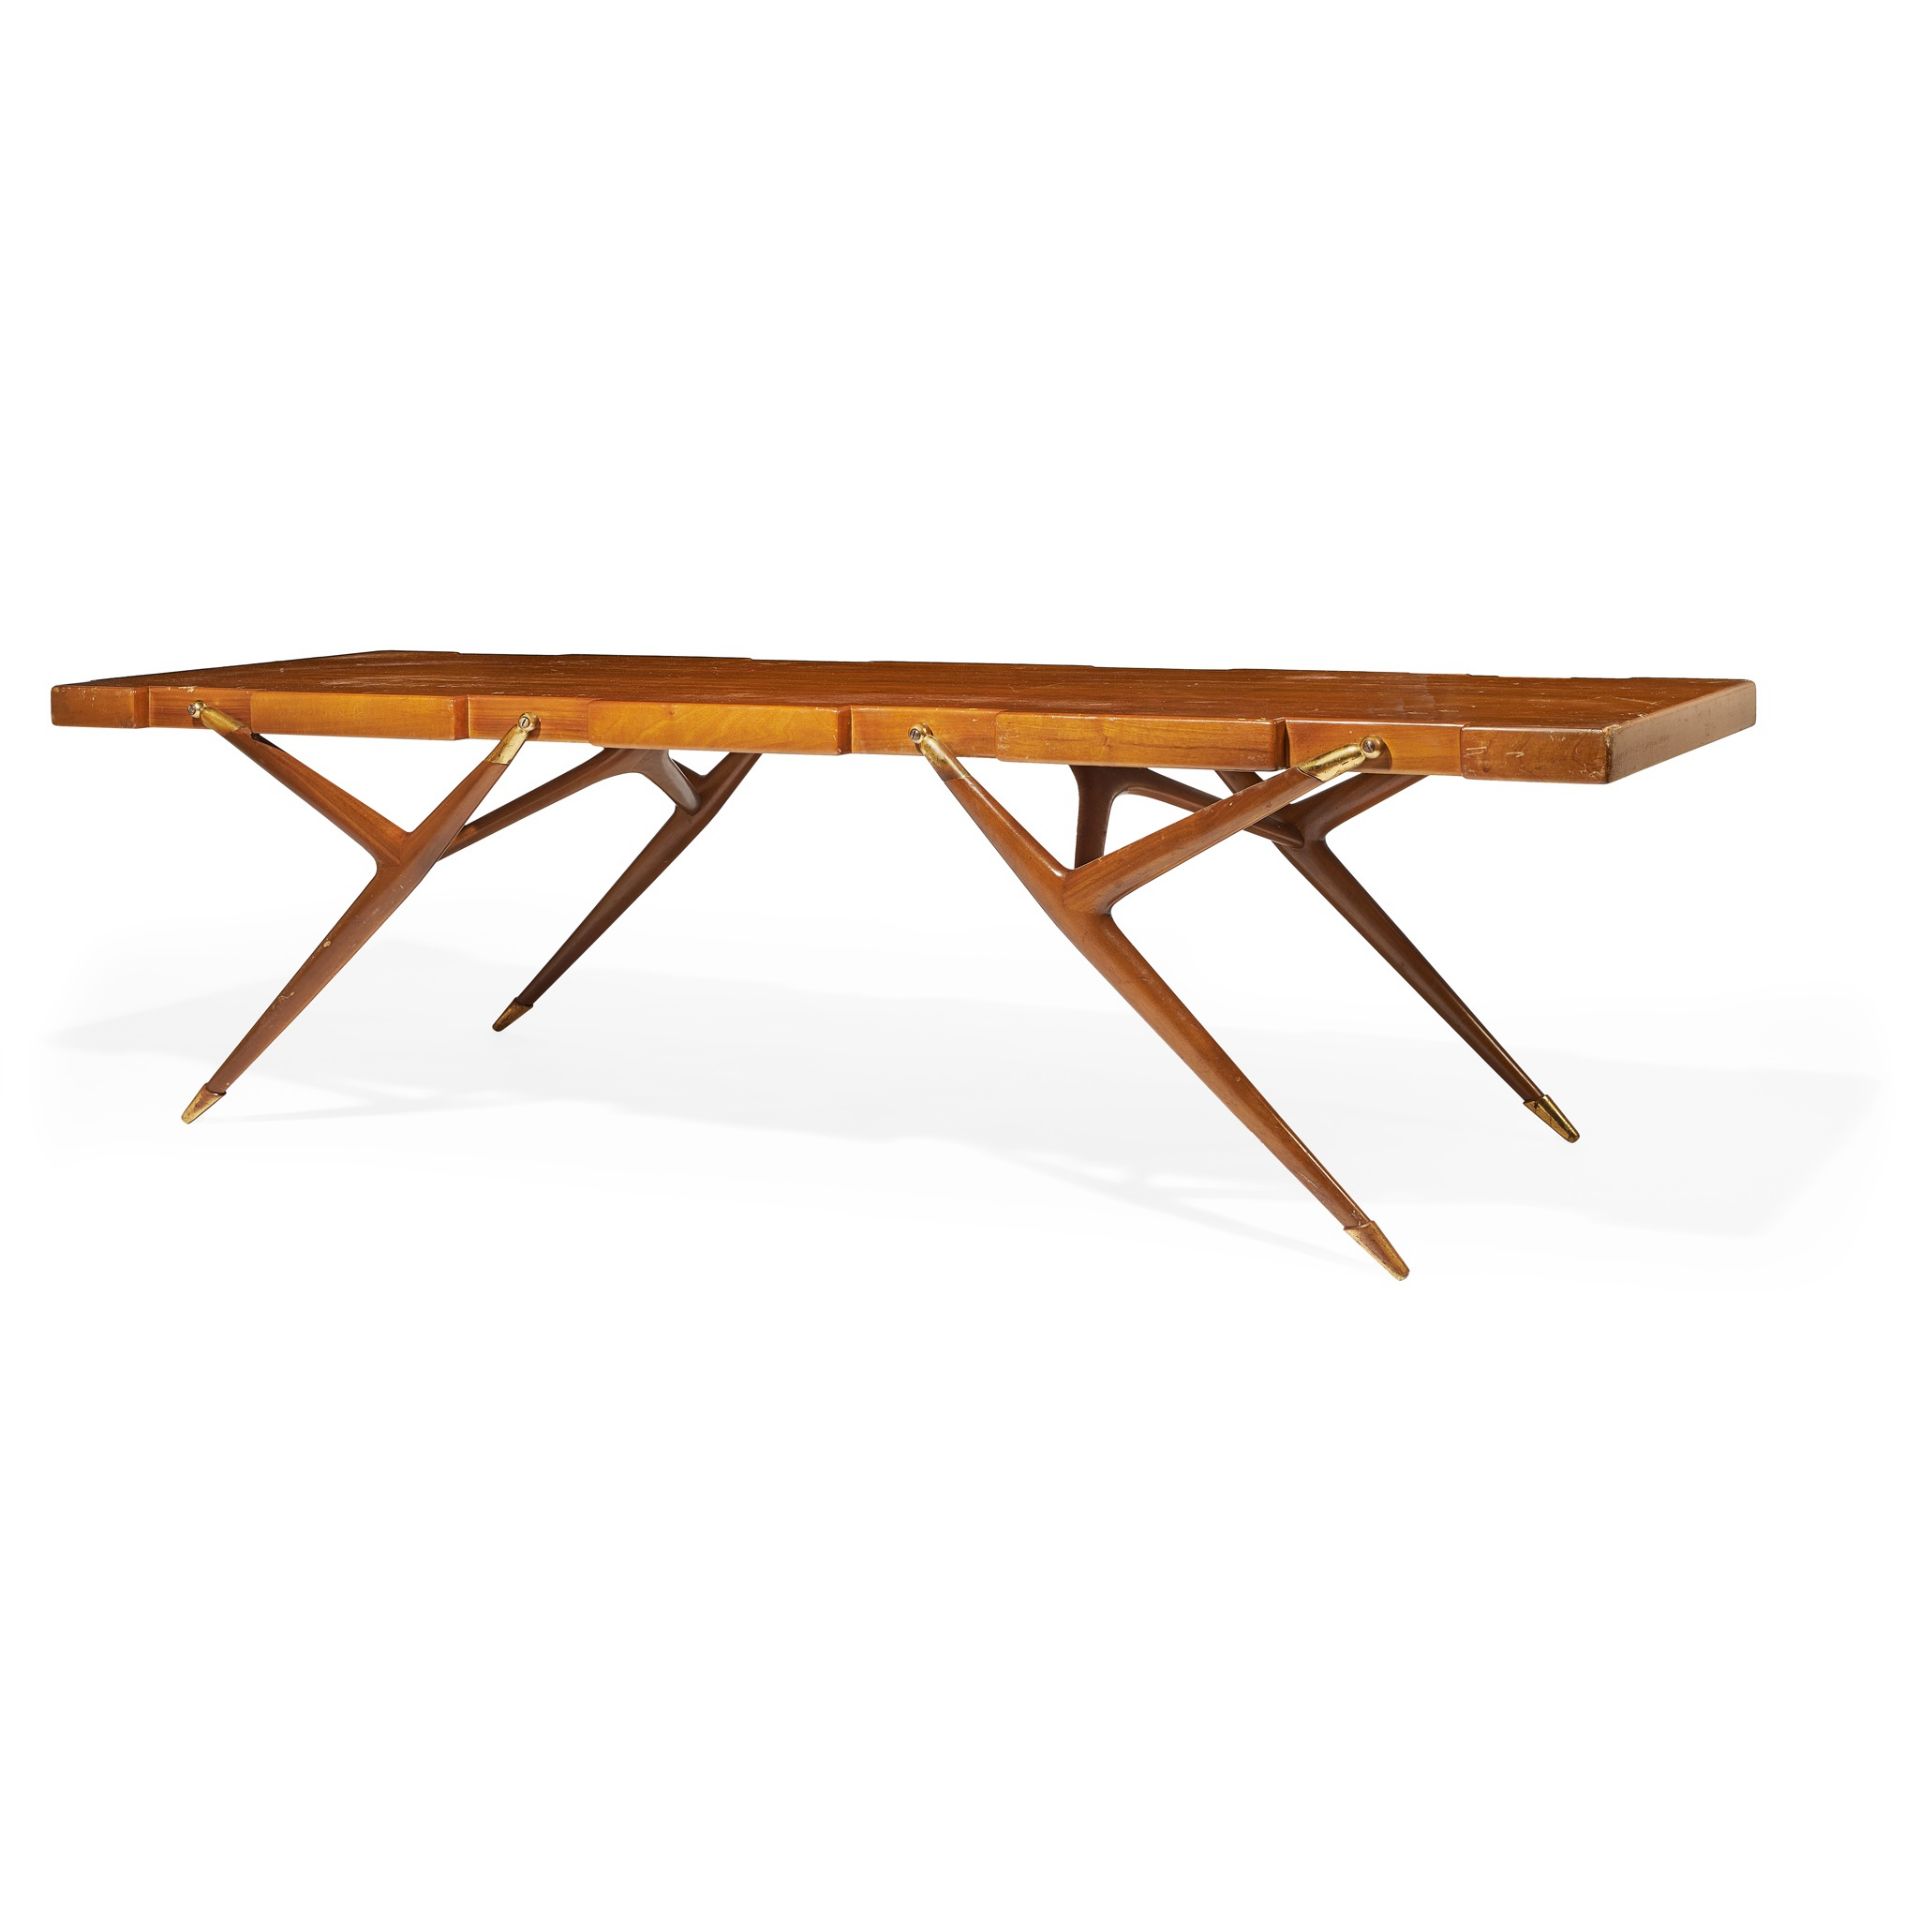 ICO PARISI (ITALIAN 1916-1996) FOR SINGER & SONS LOW TABLE, DESIGNED 1951 - Image 2 of 6